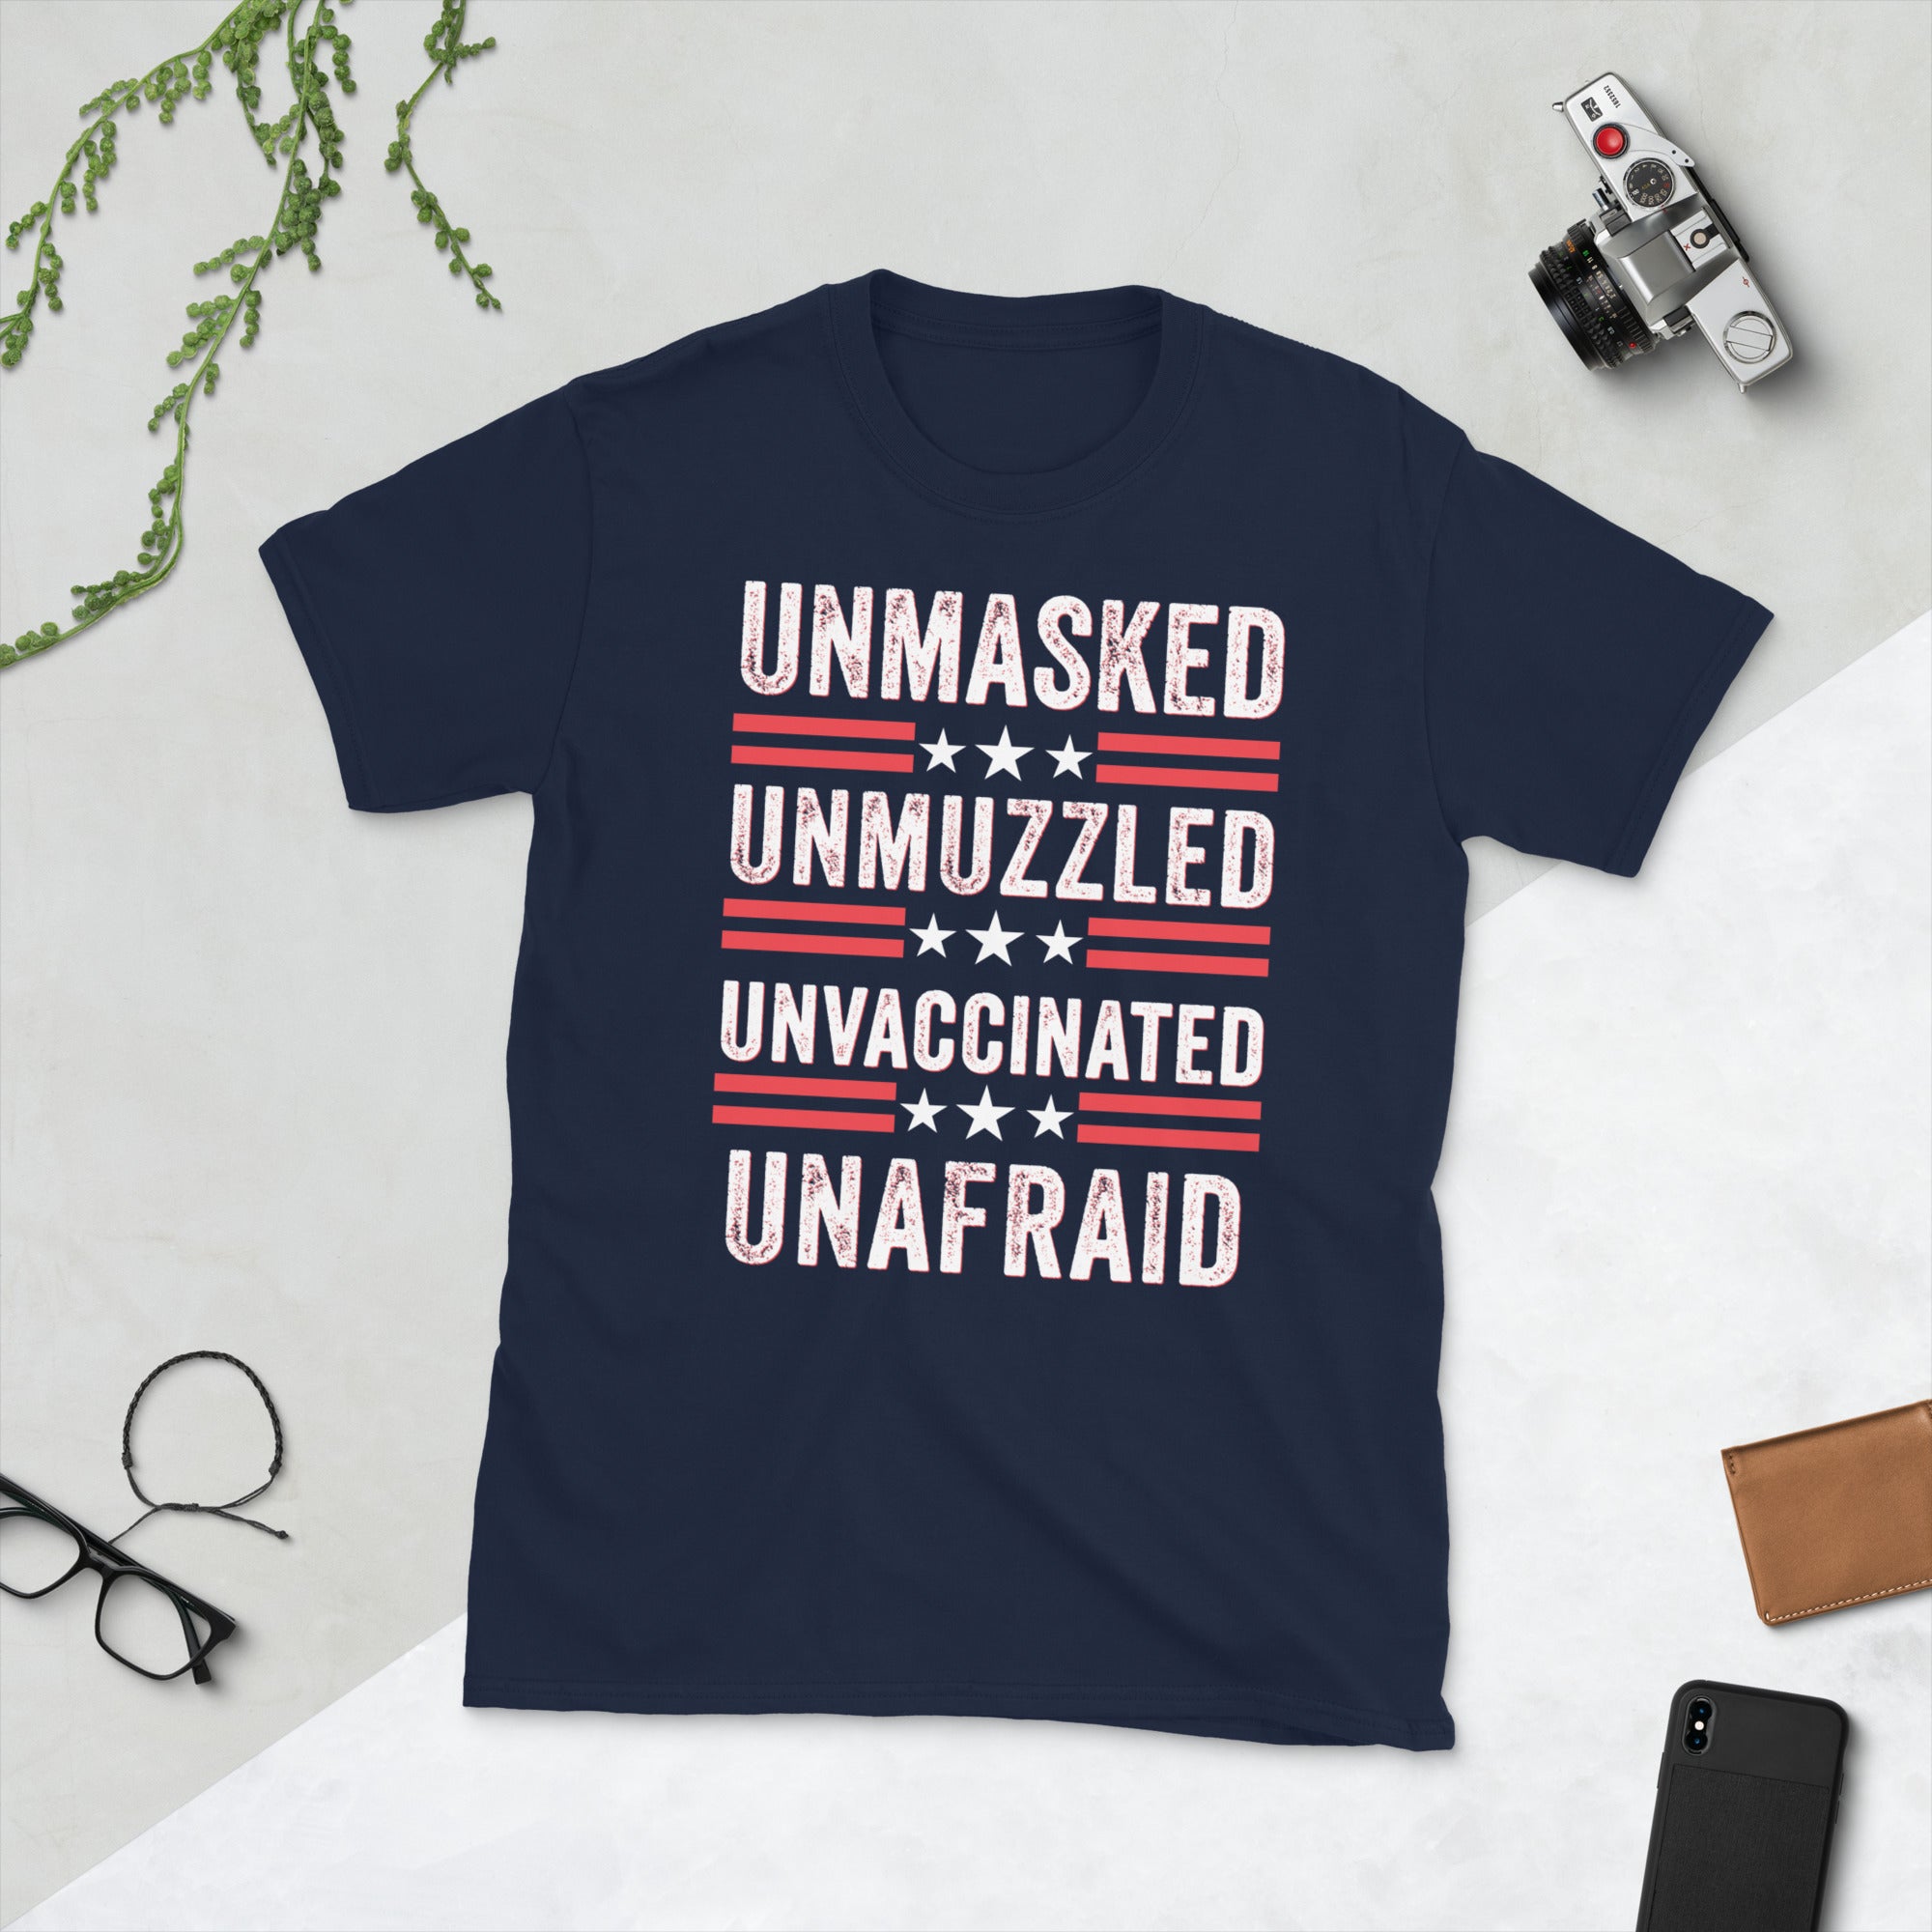 Unmasked Unmuzzled Unvaccinated Unafraid, Unvaccinated Shirt, Antimask Shirt, Unmask America, Freedom Shirt, Freedom over Fear Shirt - Madeinsea©